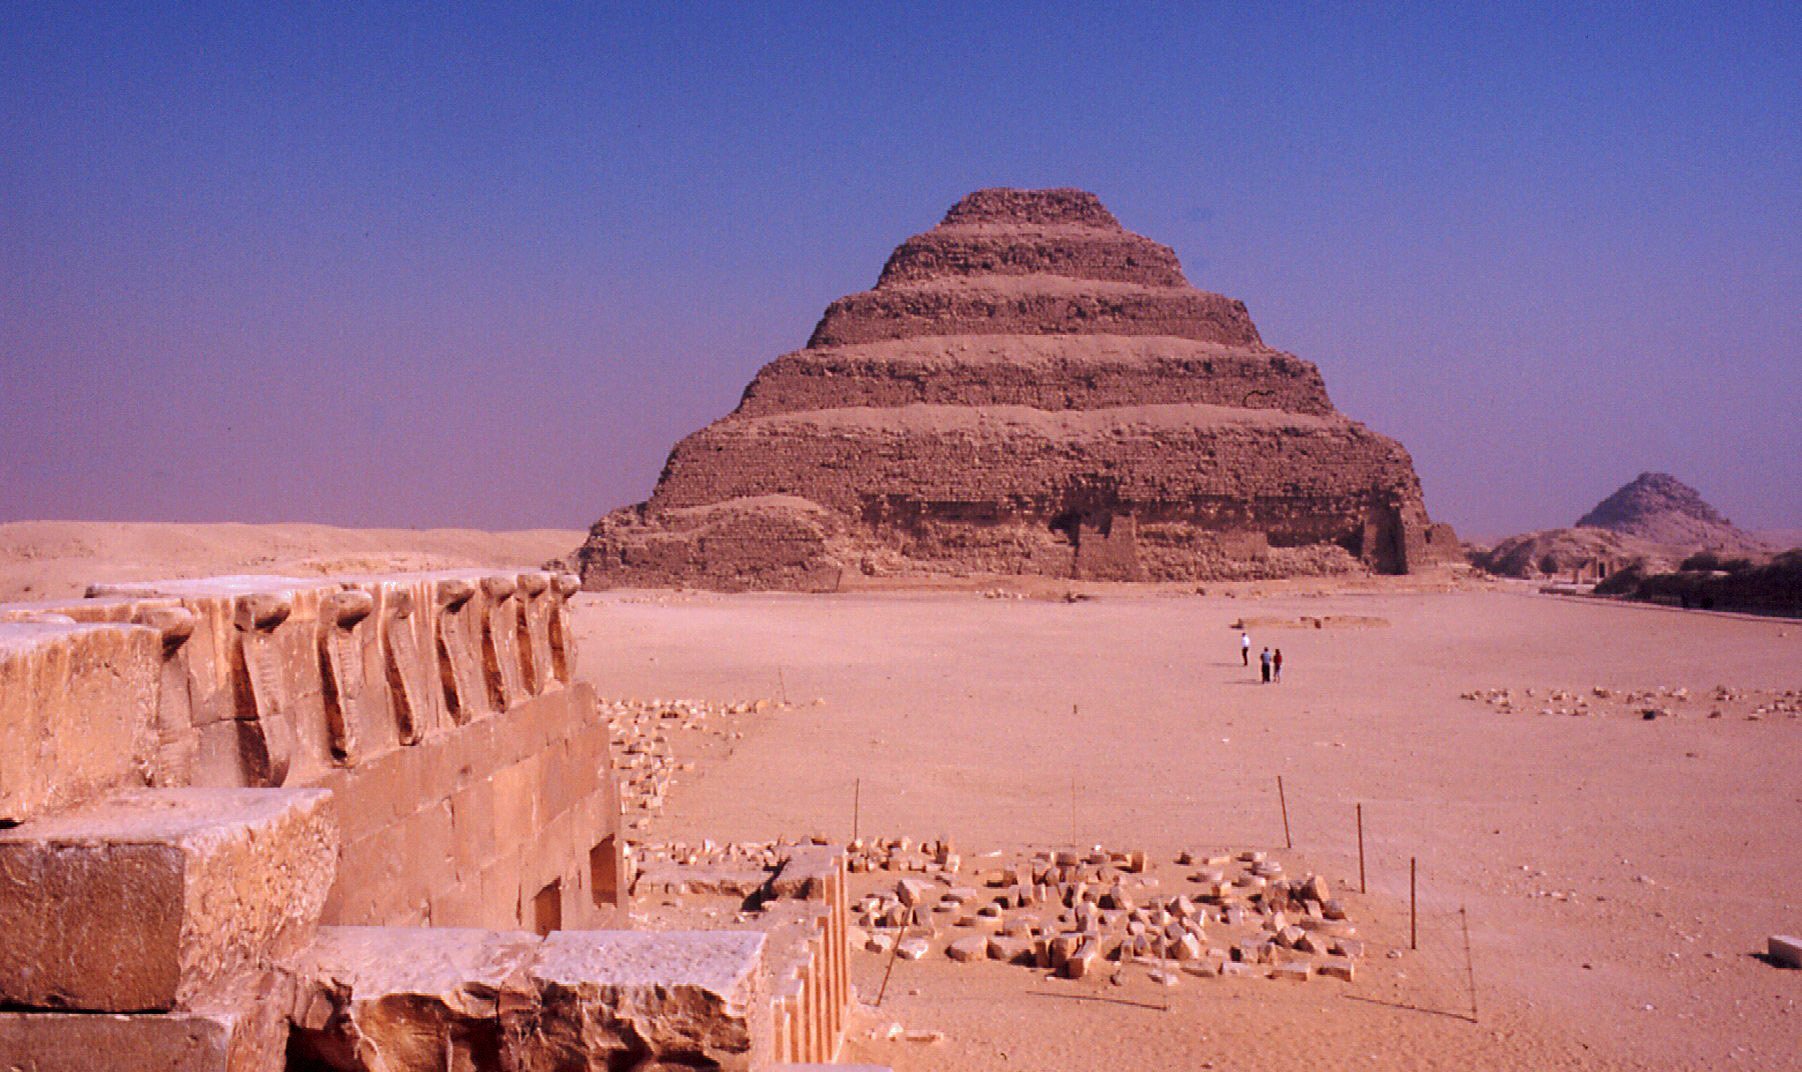 Travel packages to Egypt